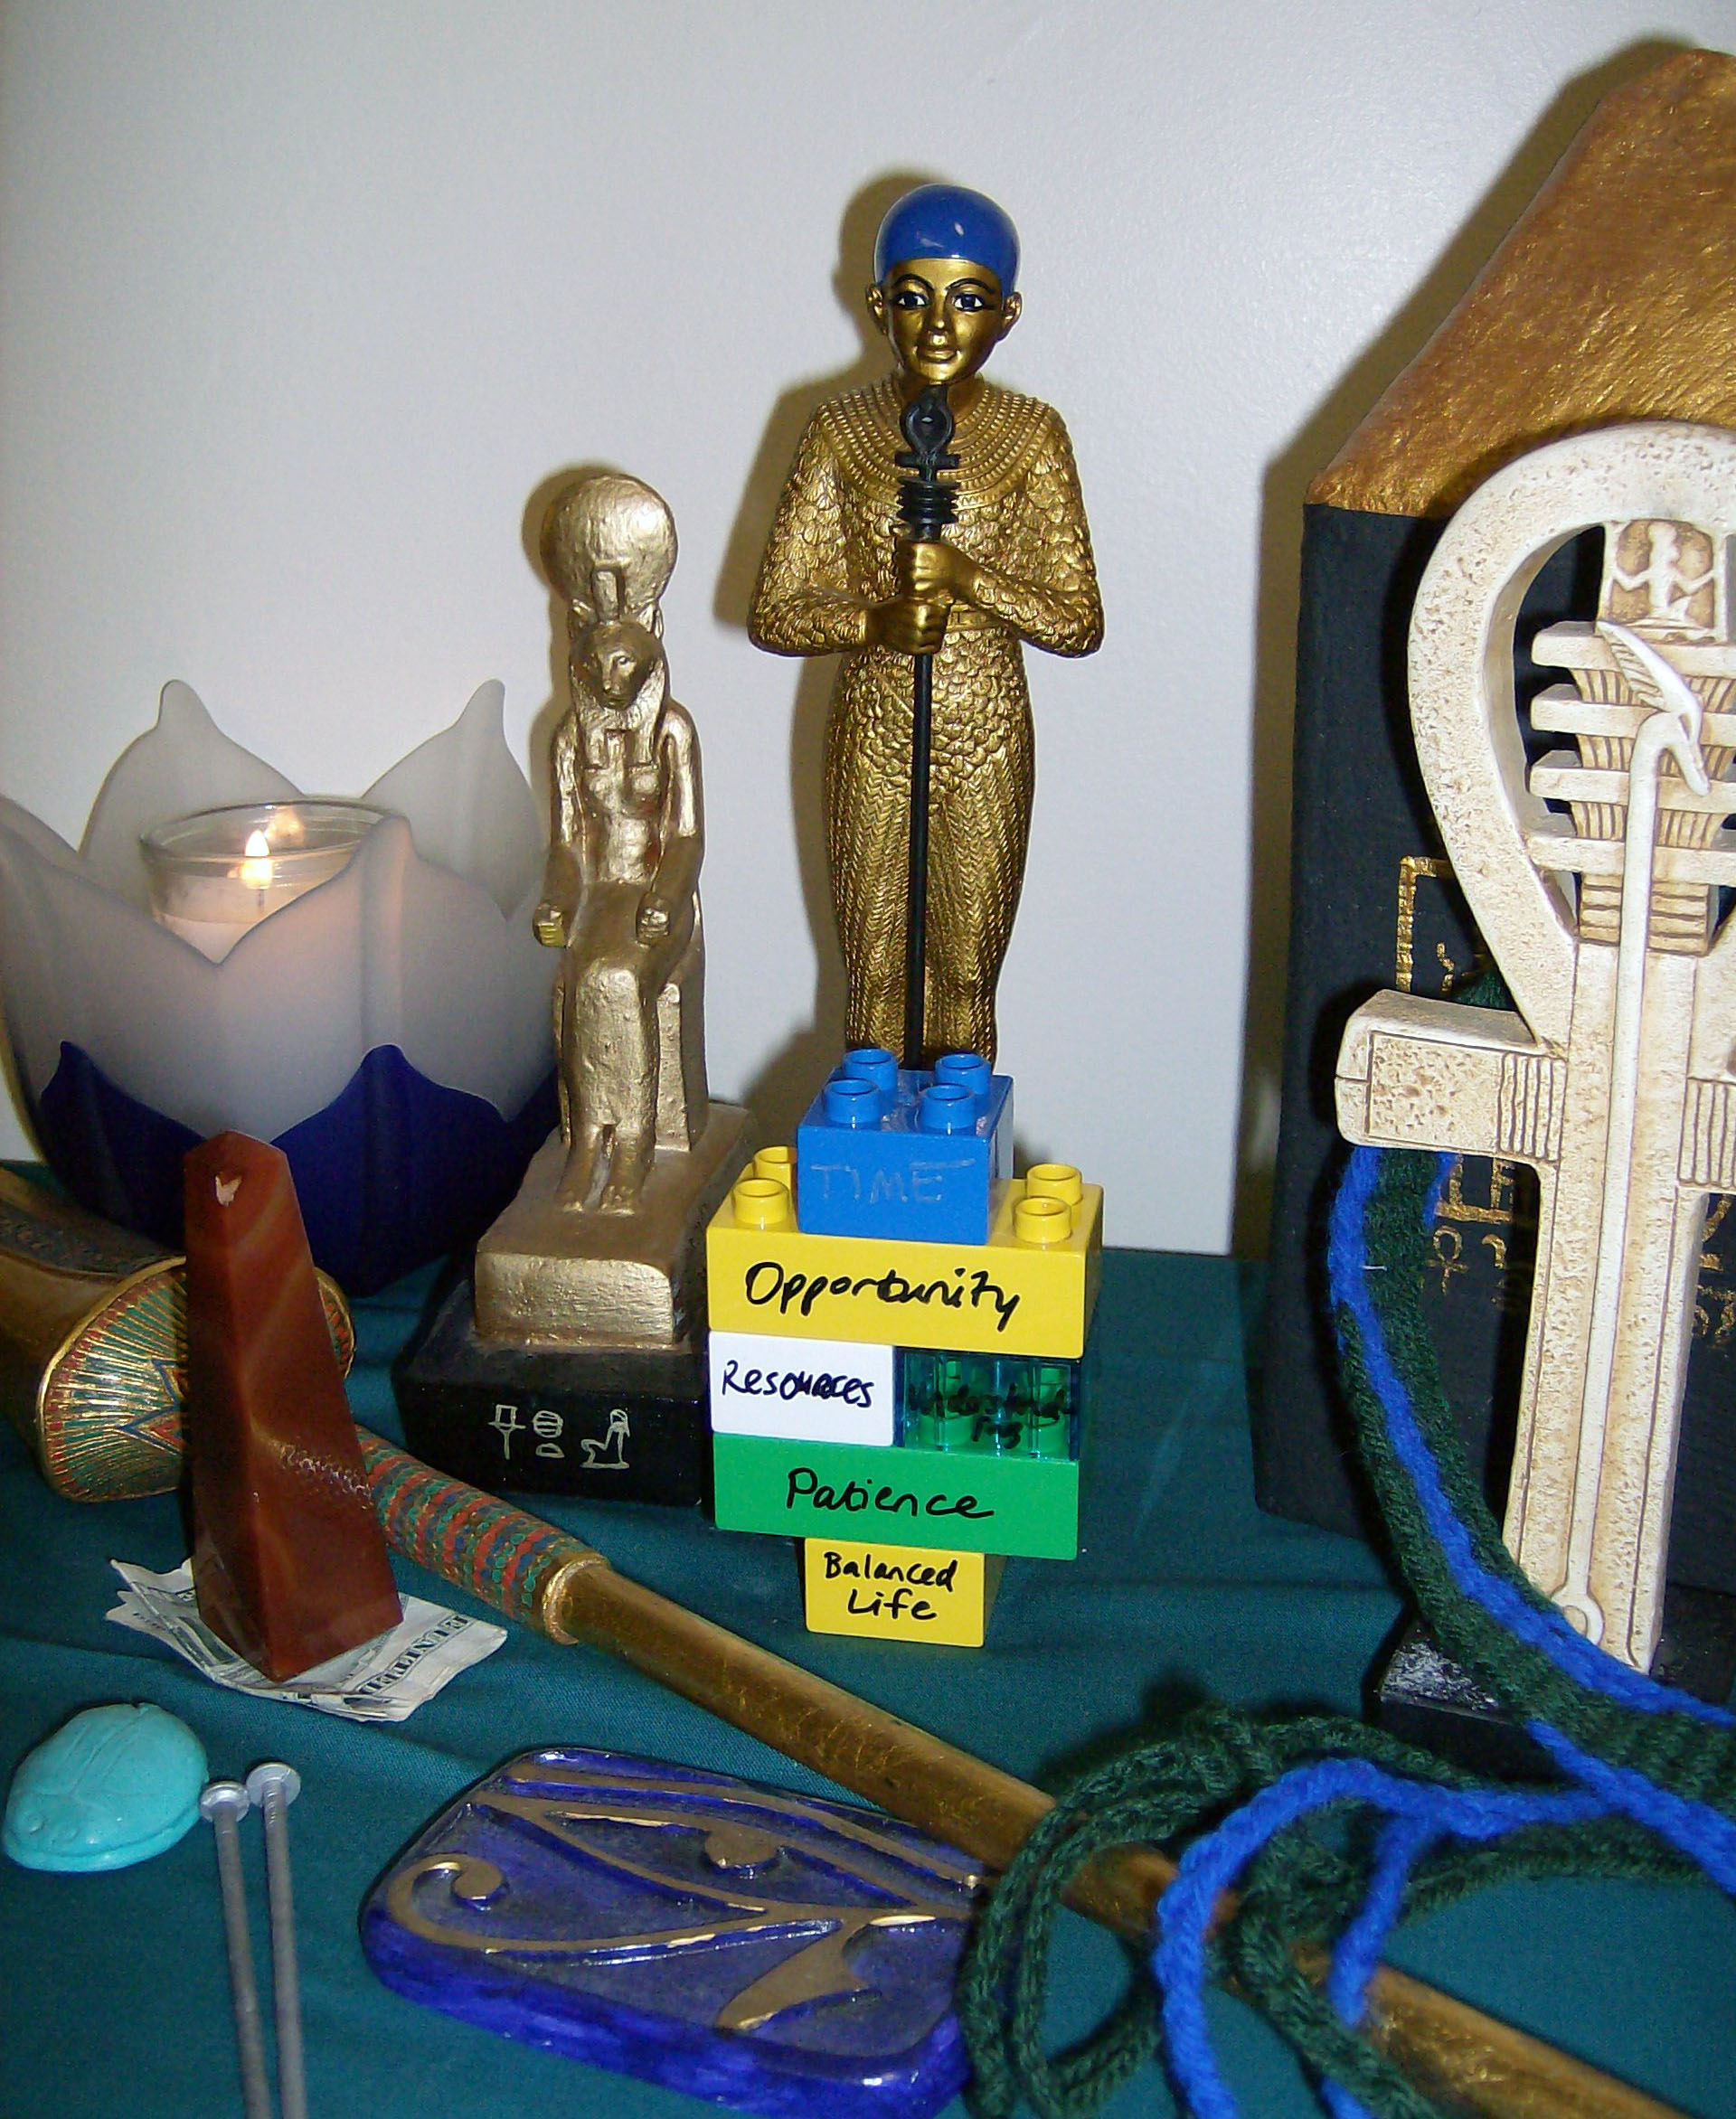 My Ptah Heka sitting on Ptah's altar.